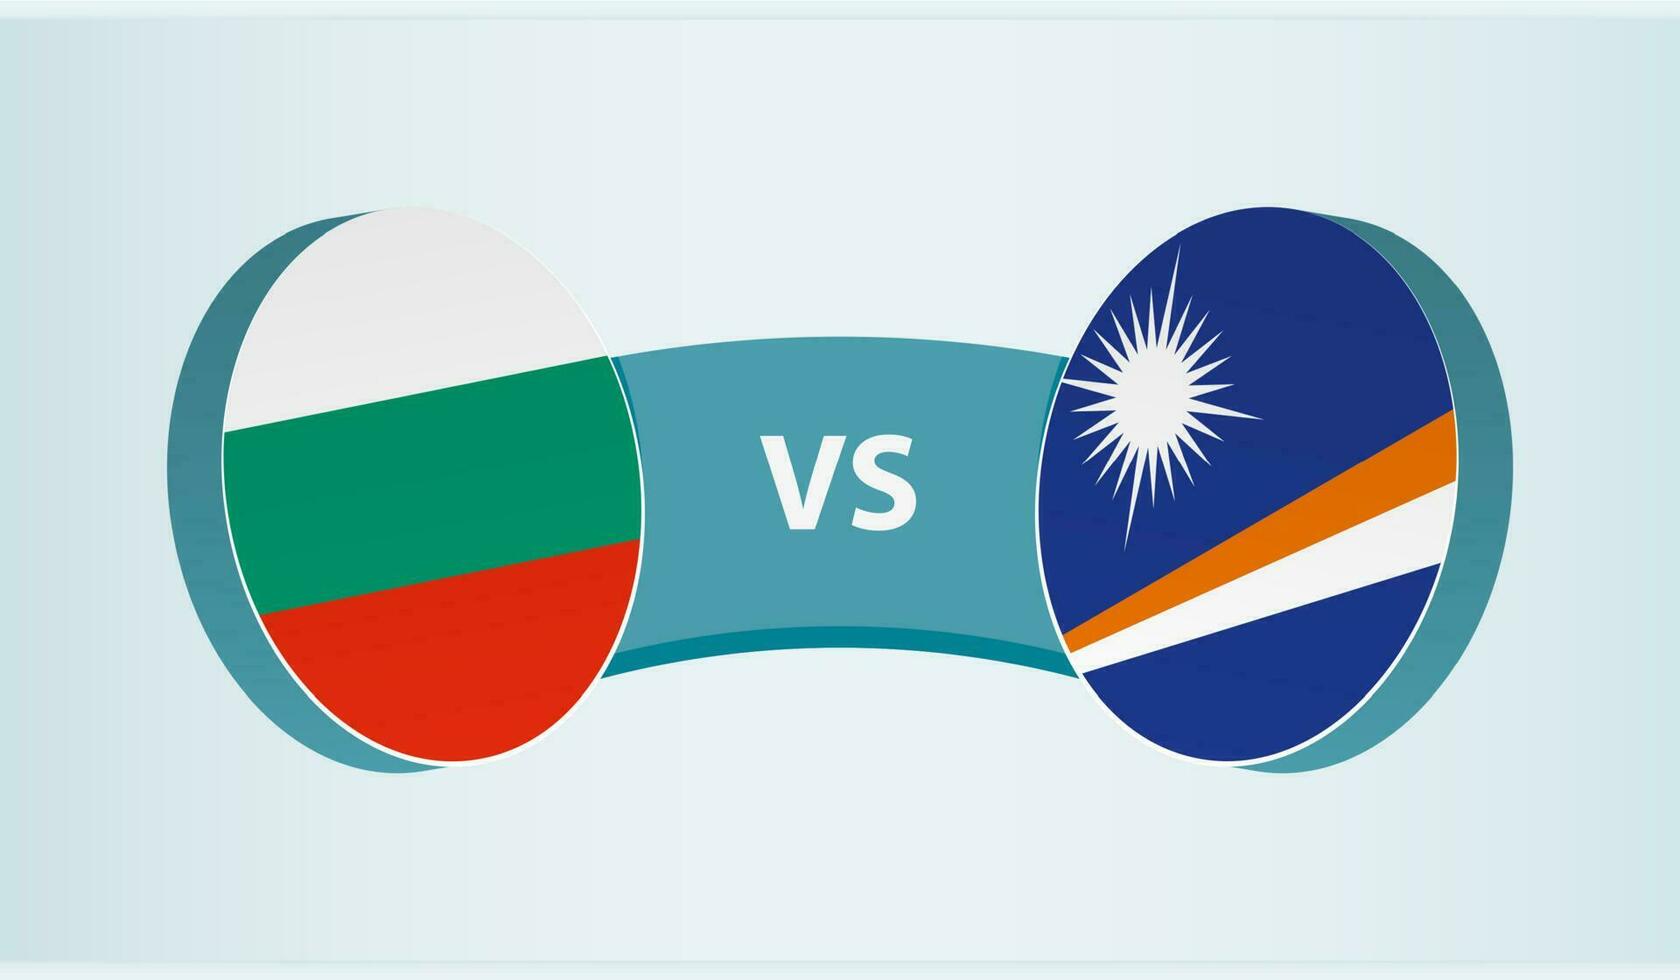 Bulgaria versus Marshall Islands, team sports competition concept. vector